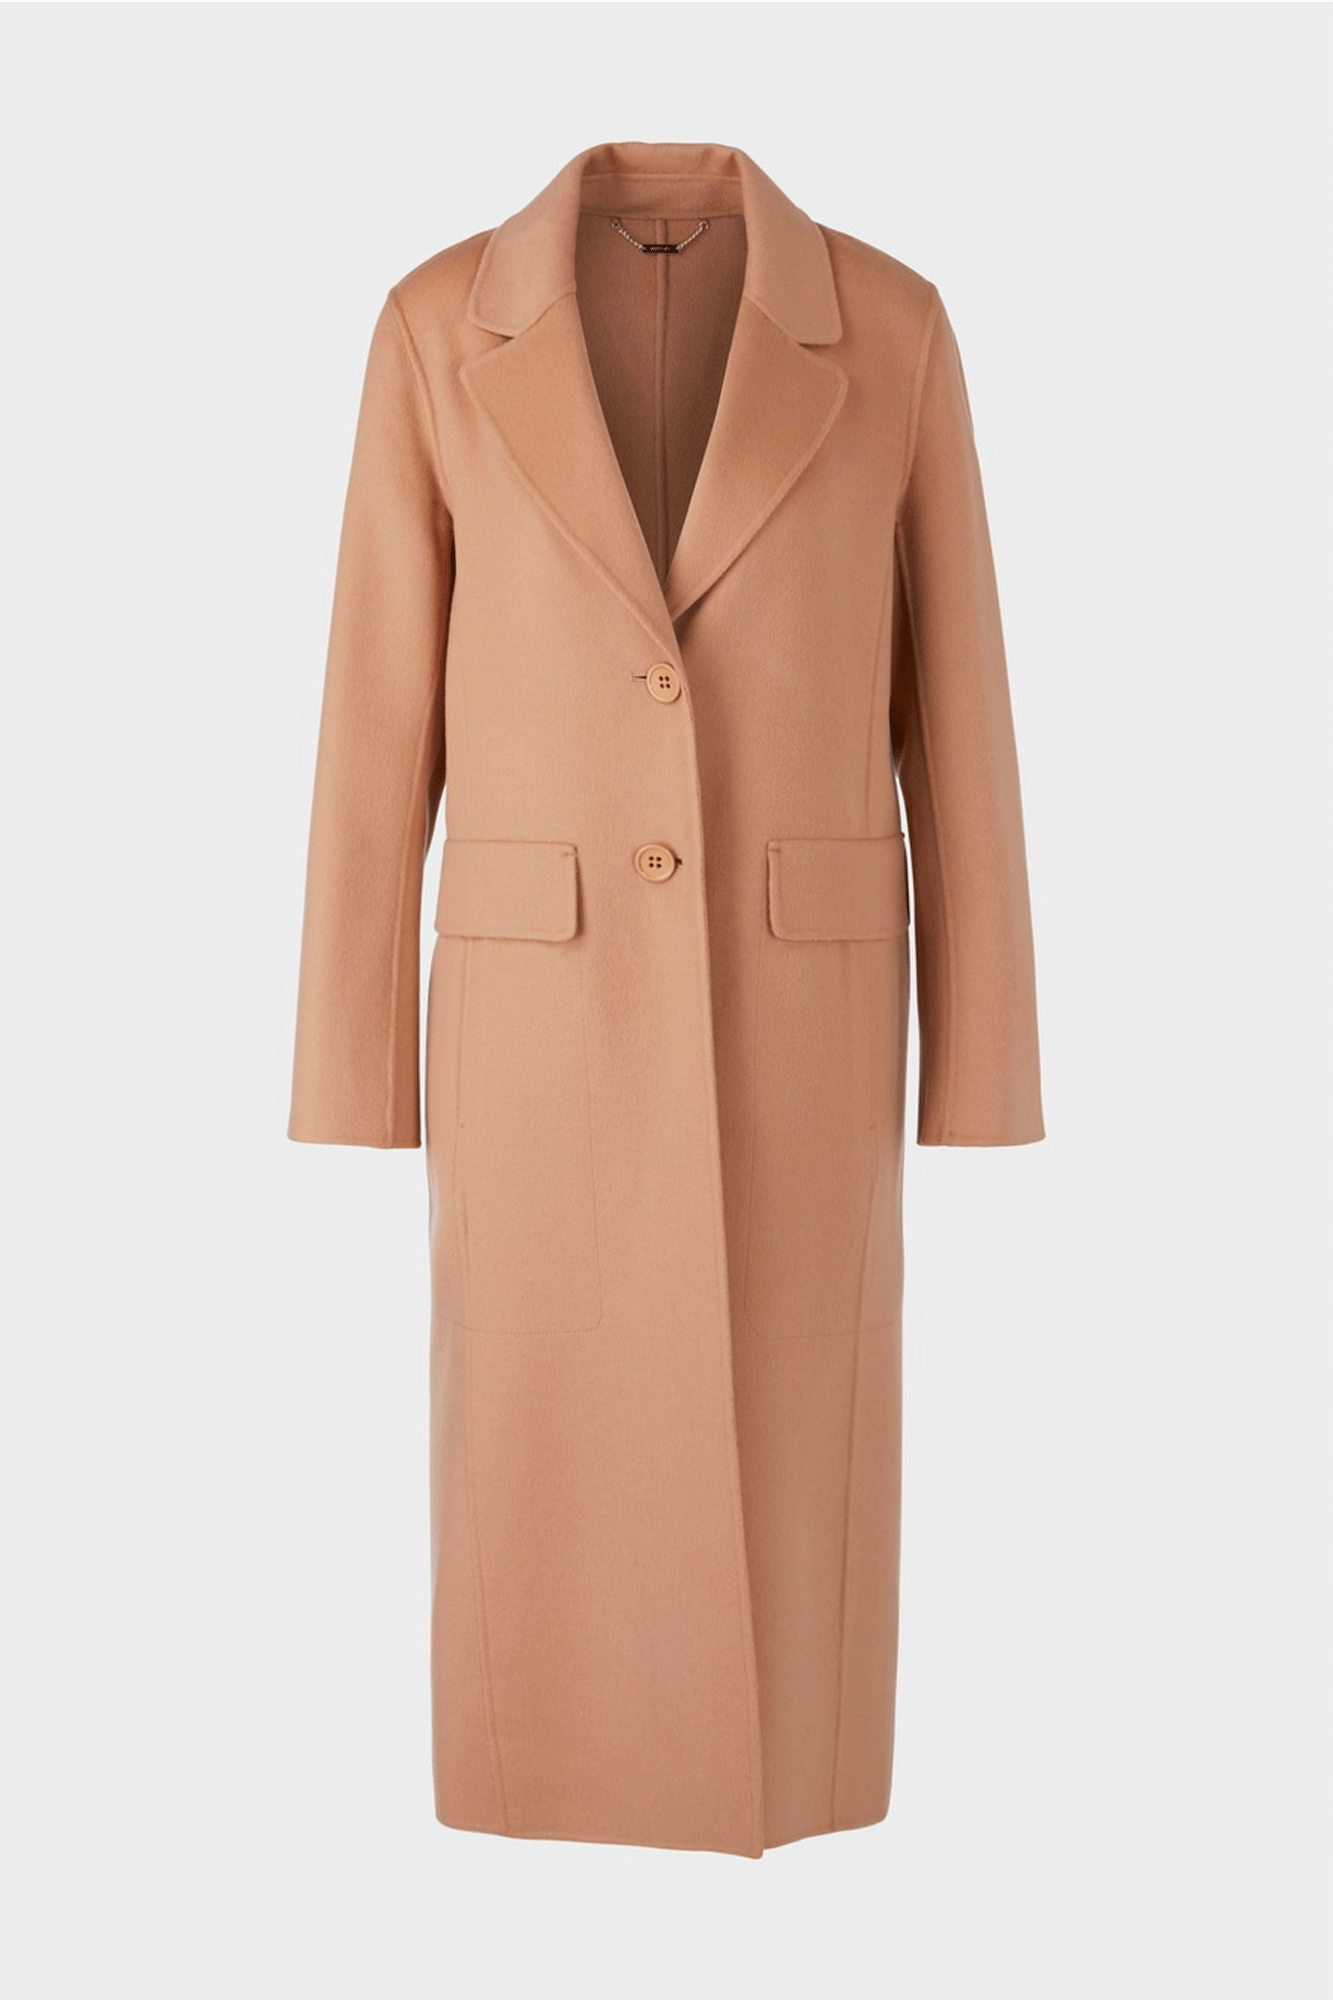 Stay warm in style with Marc Cain’s Long Double Coat. This 100% cotton coat features a chic double breasted design